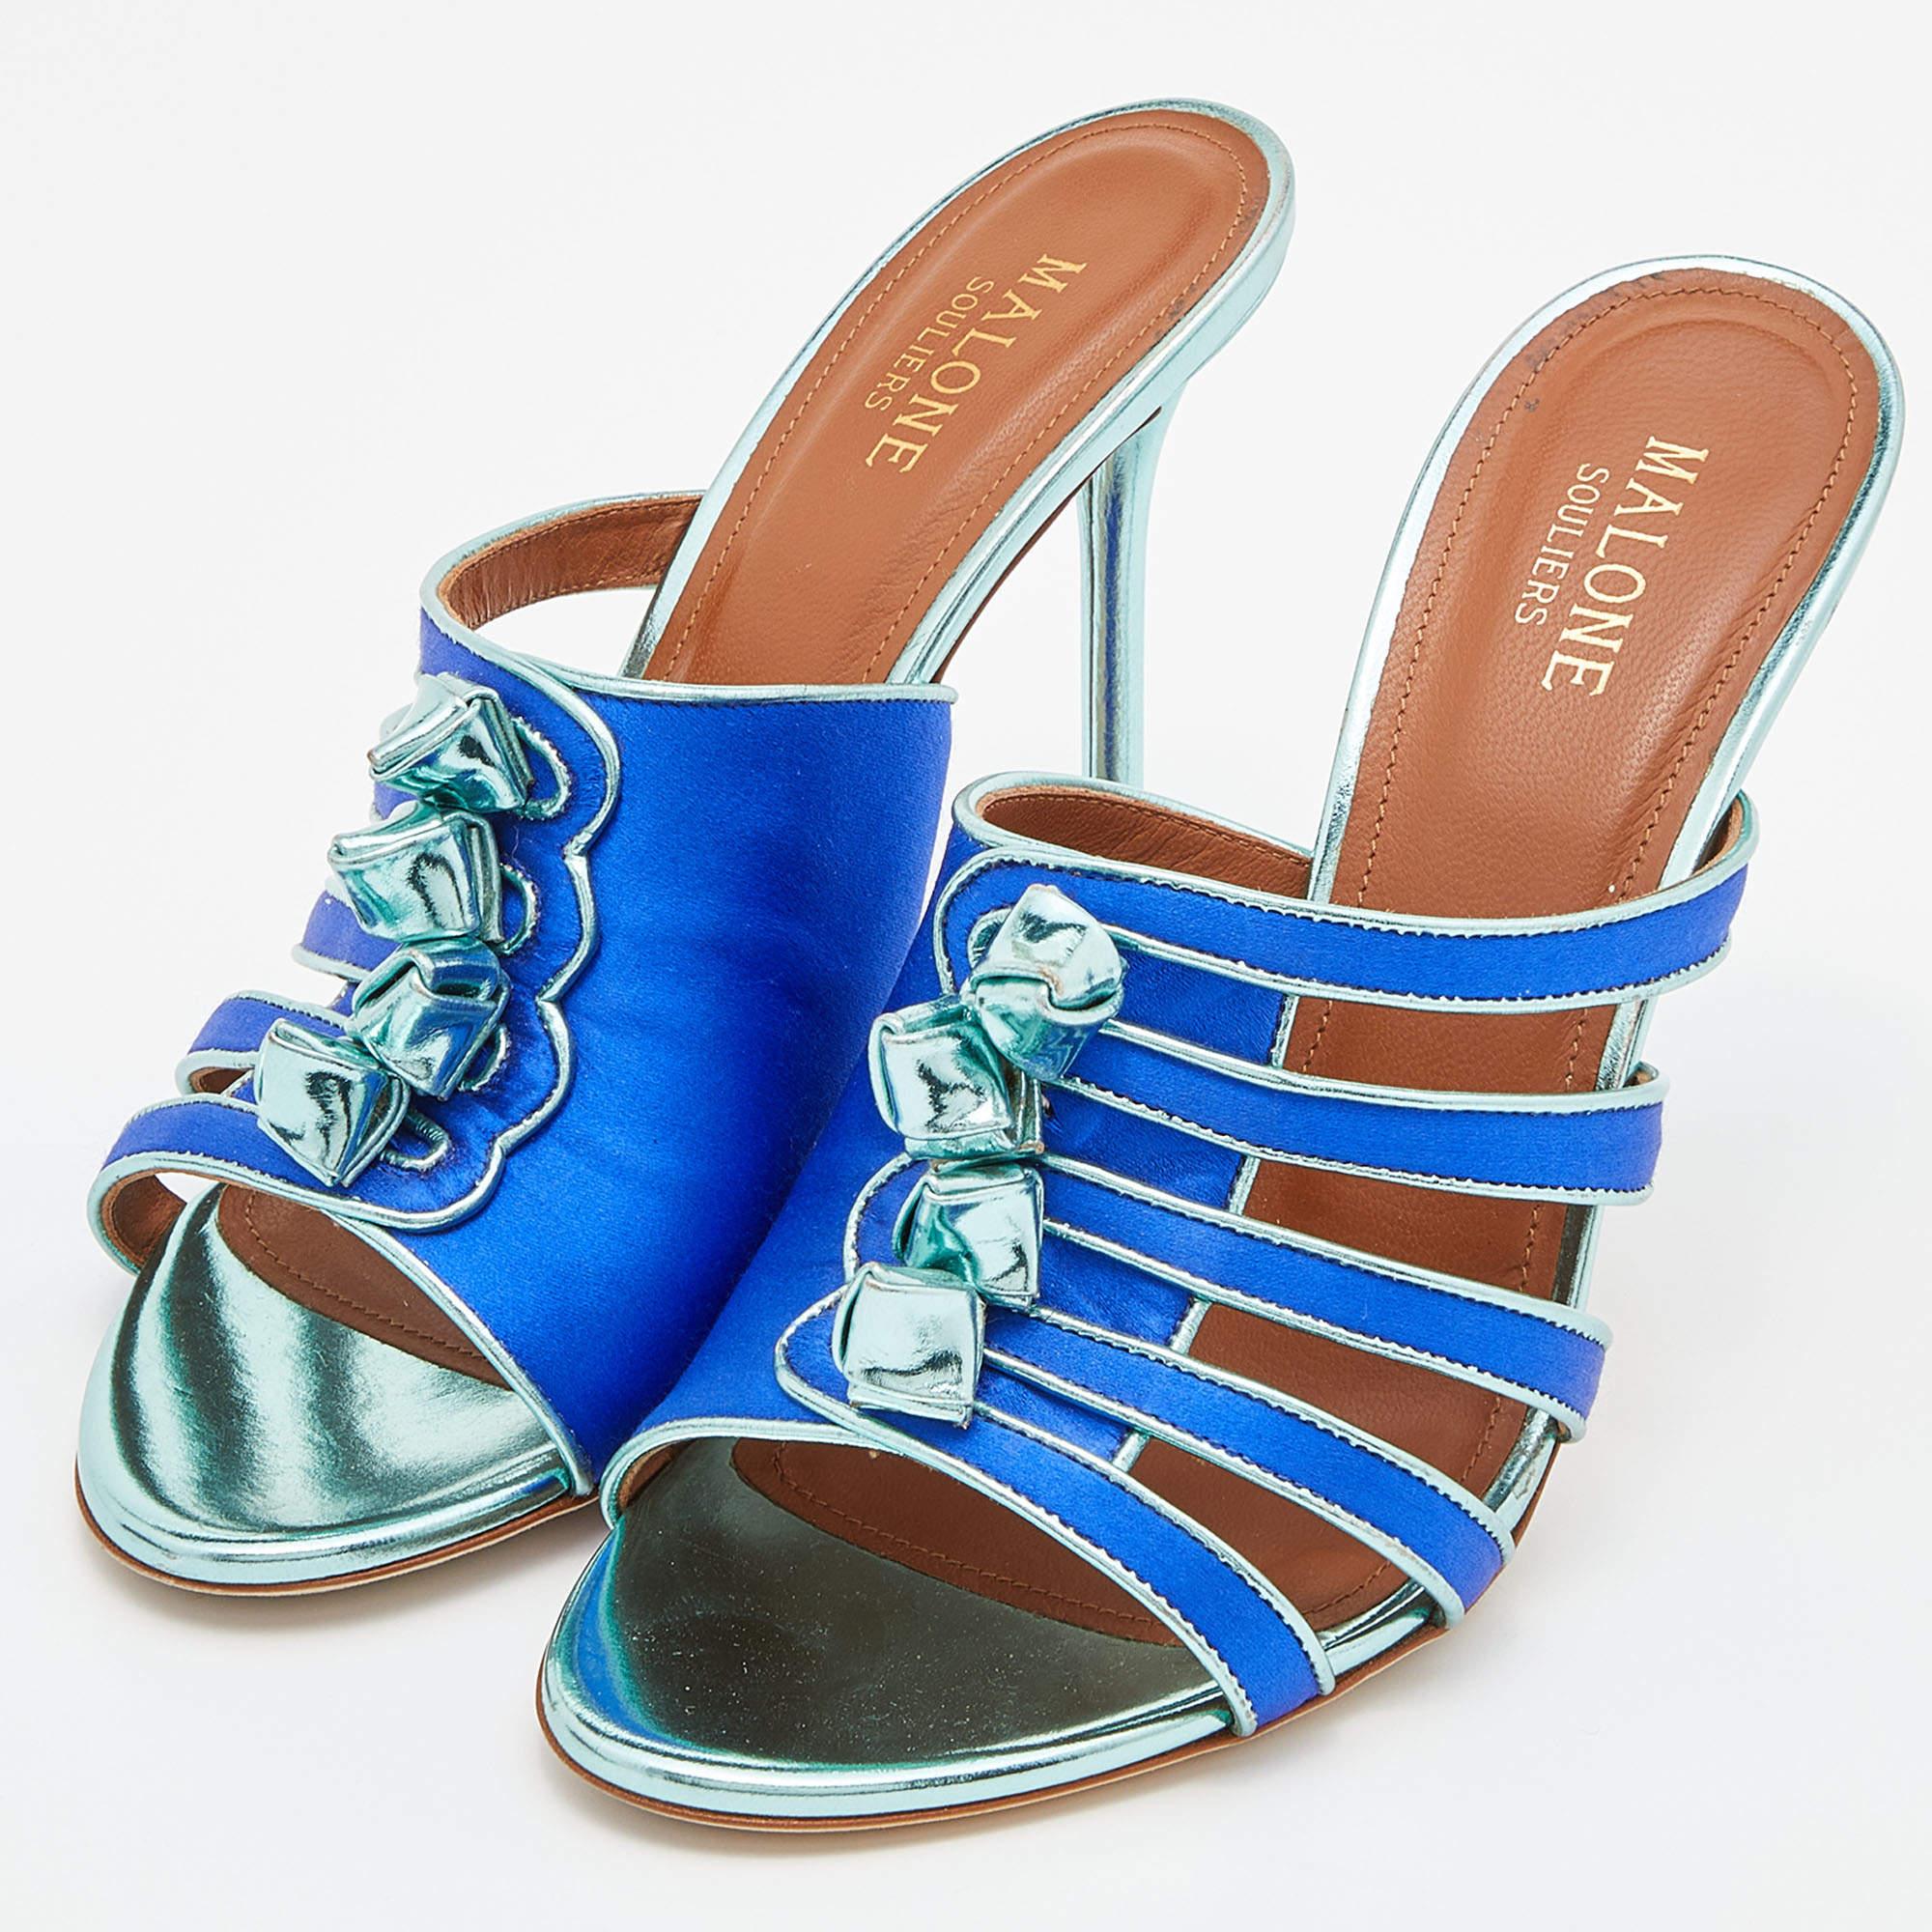 Malone Souliers Blue/Metallic Green Satin and Leather Open Toe Mules Size 39 In Good Condition For Sale In Dubai, Al Qouz 2